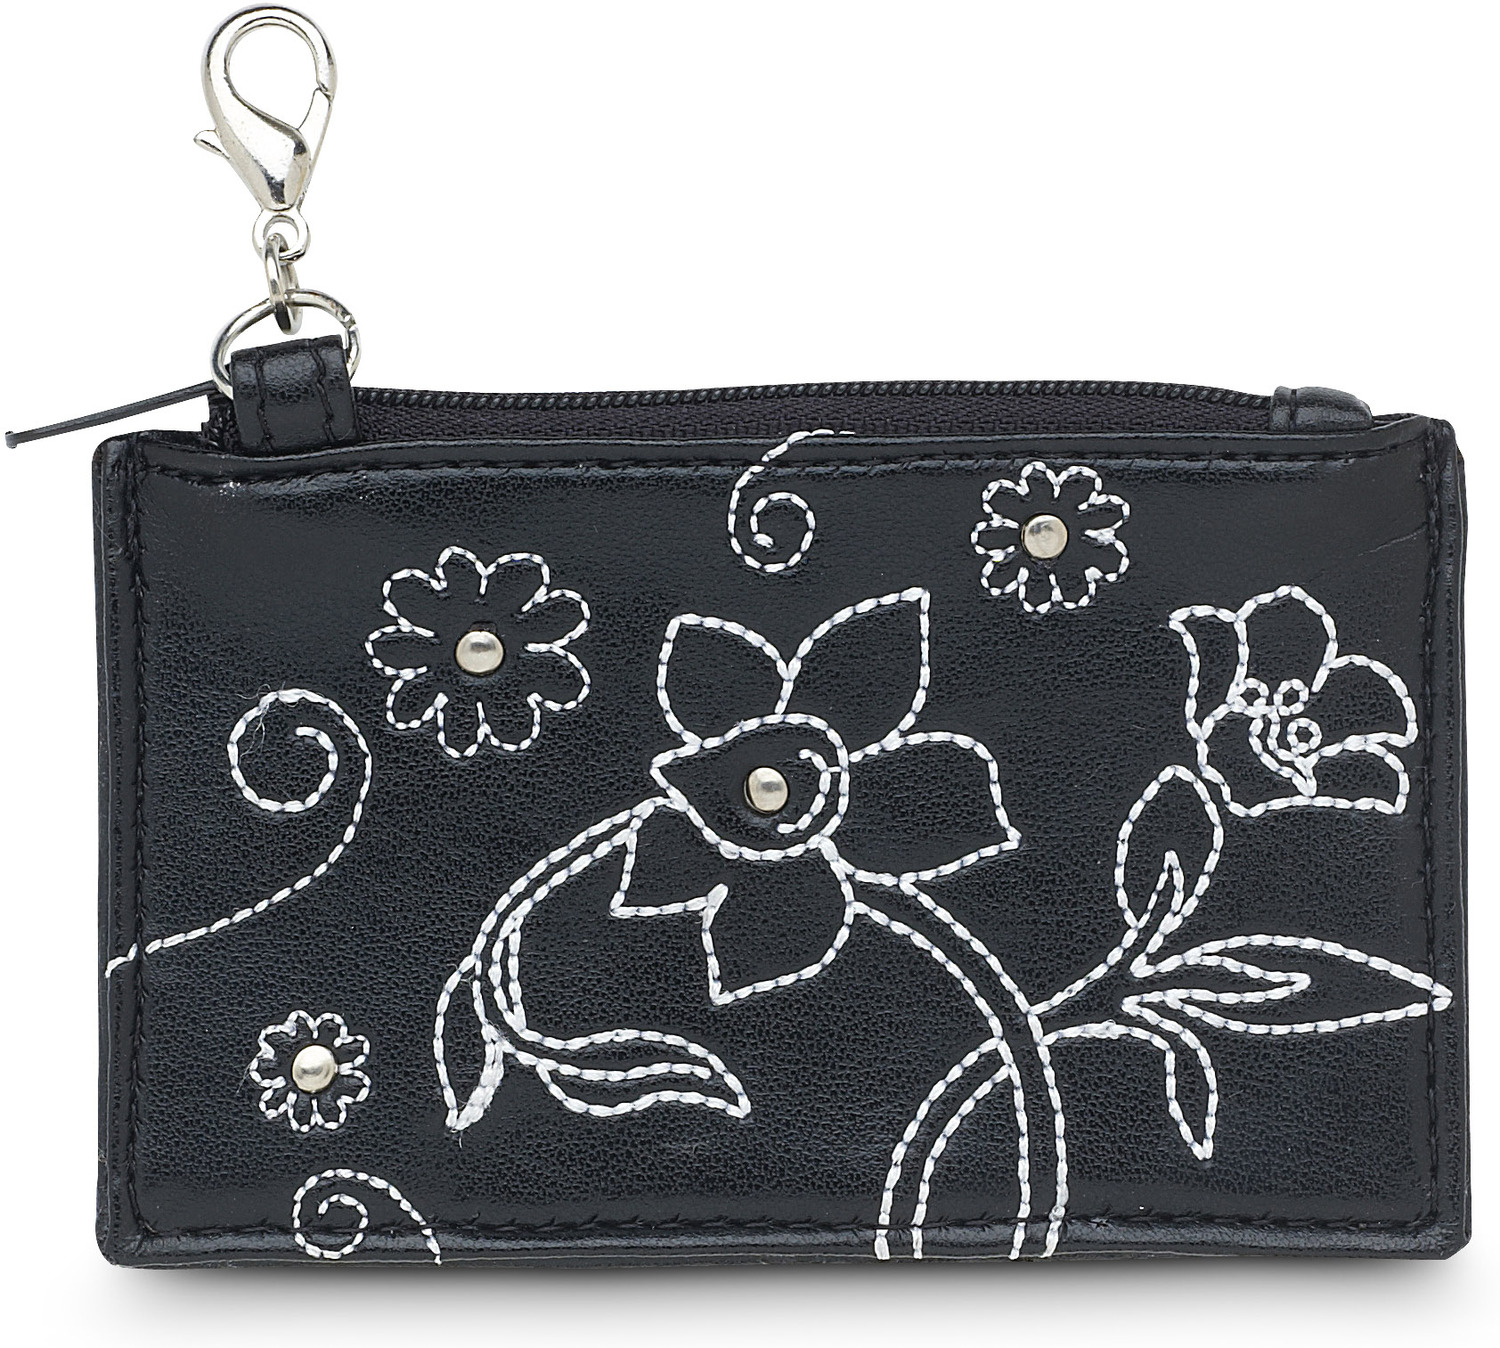 Black Floral by LAYLA - Black Floral - 4.5" x 2.75" Genuine Leather Purse